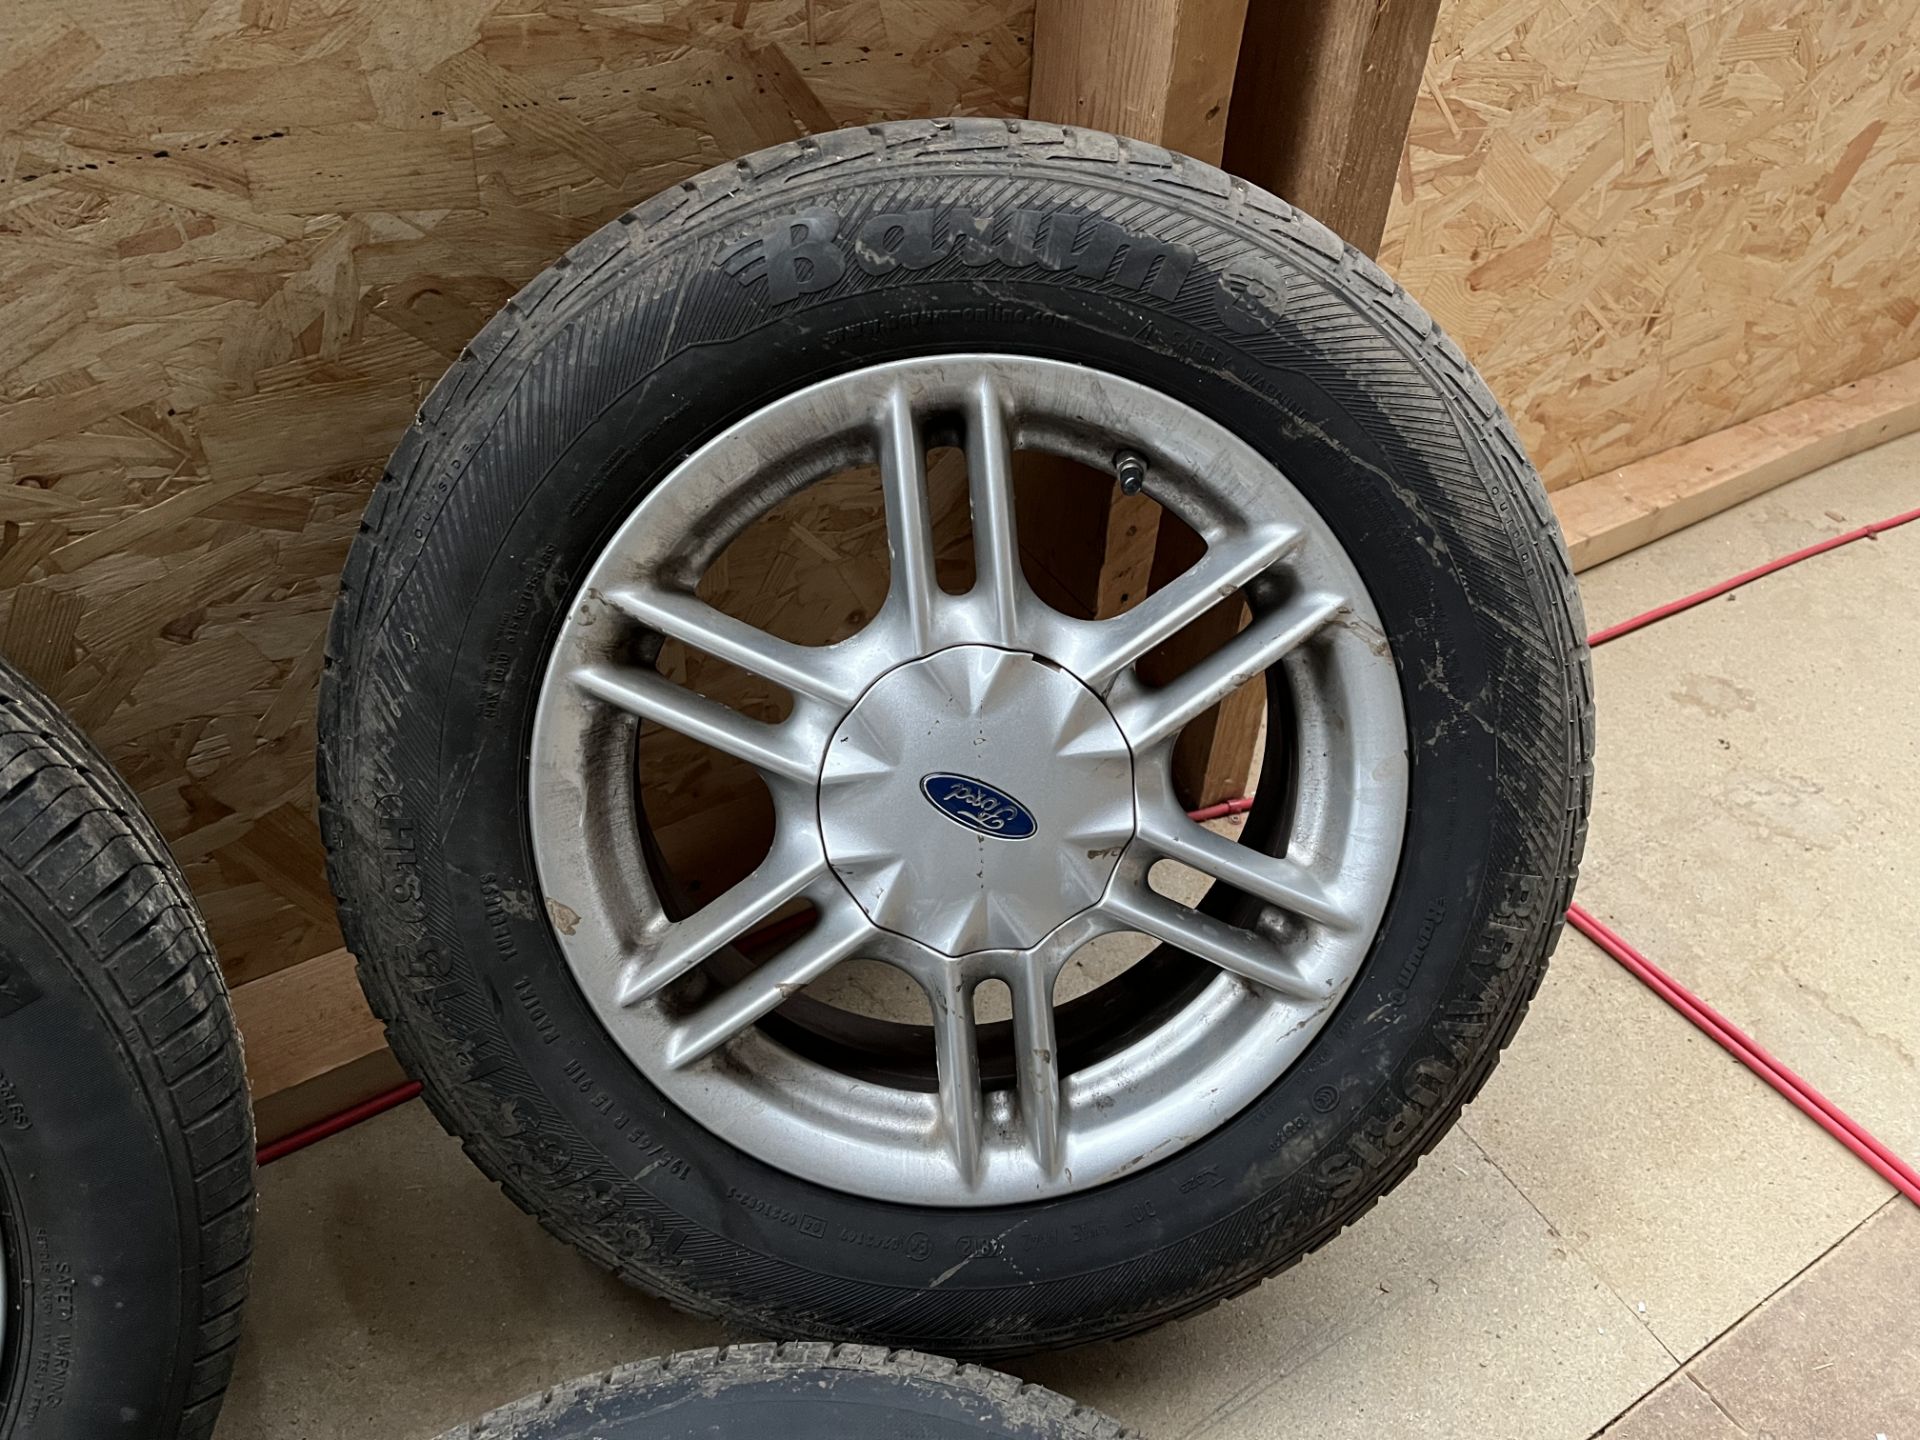 MKII Ford Mondeo Wheels - Image 5 of 5